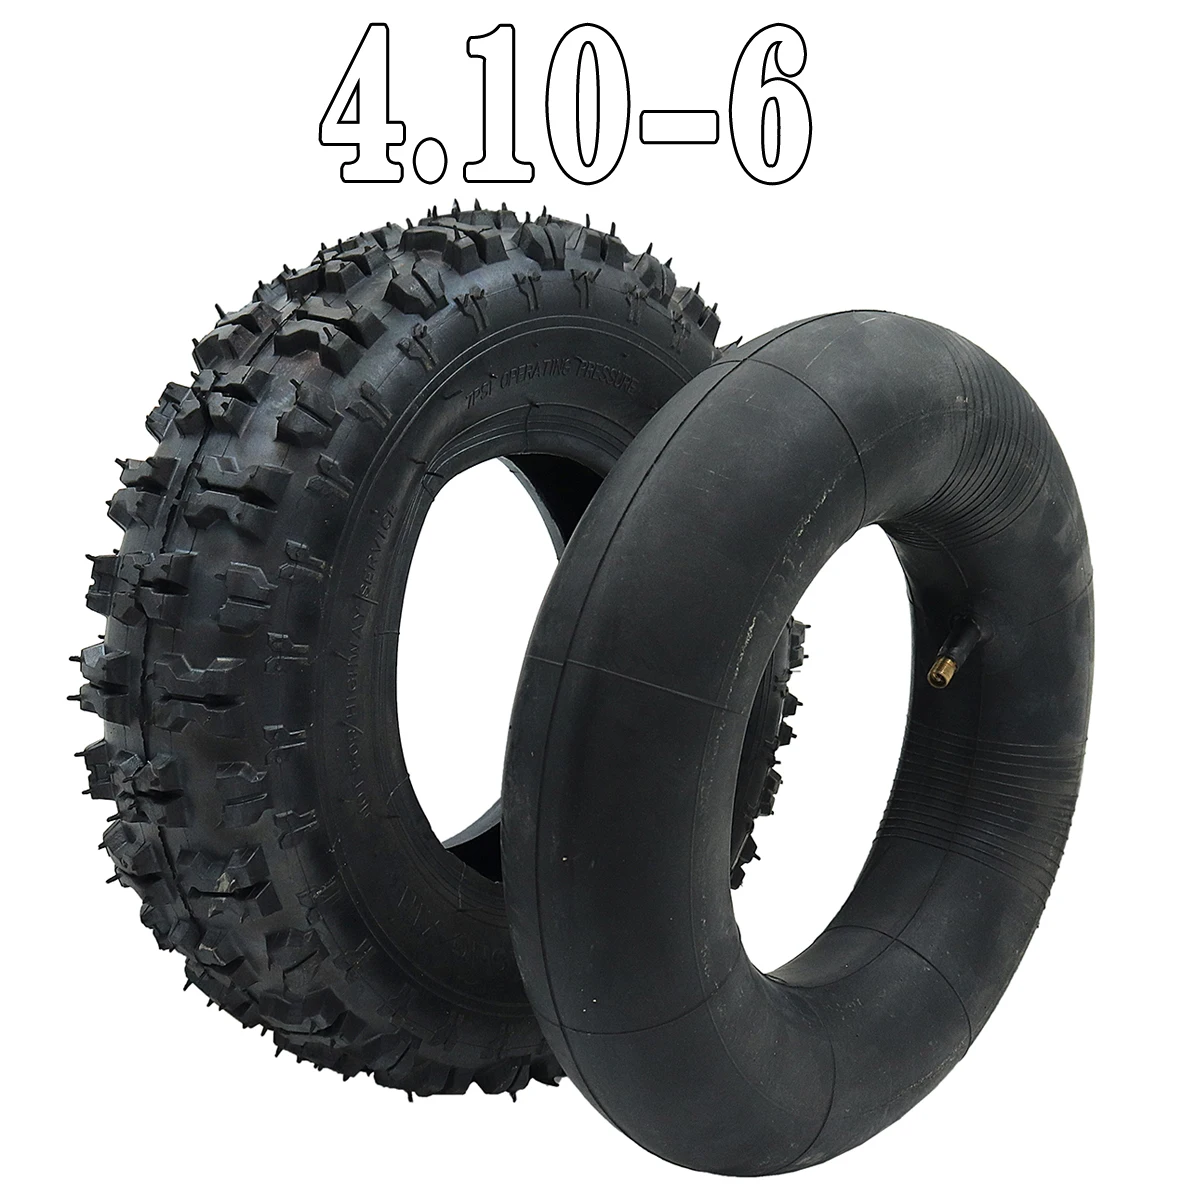 

6 Inch Tires Front 4.10-6 Rear 13x5.00-6 Inner and Outer Tube For 47cc 49cc Small ATV Go Kart Mini Quad Bike Snowmobile Parts